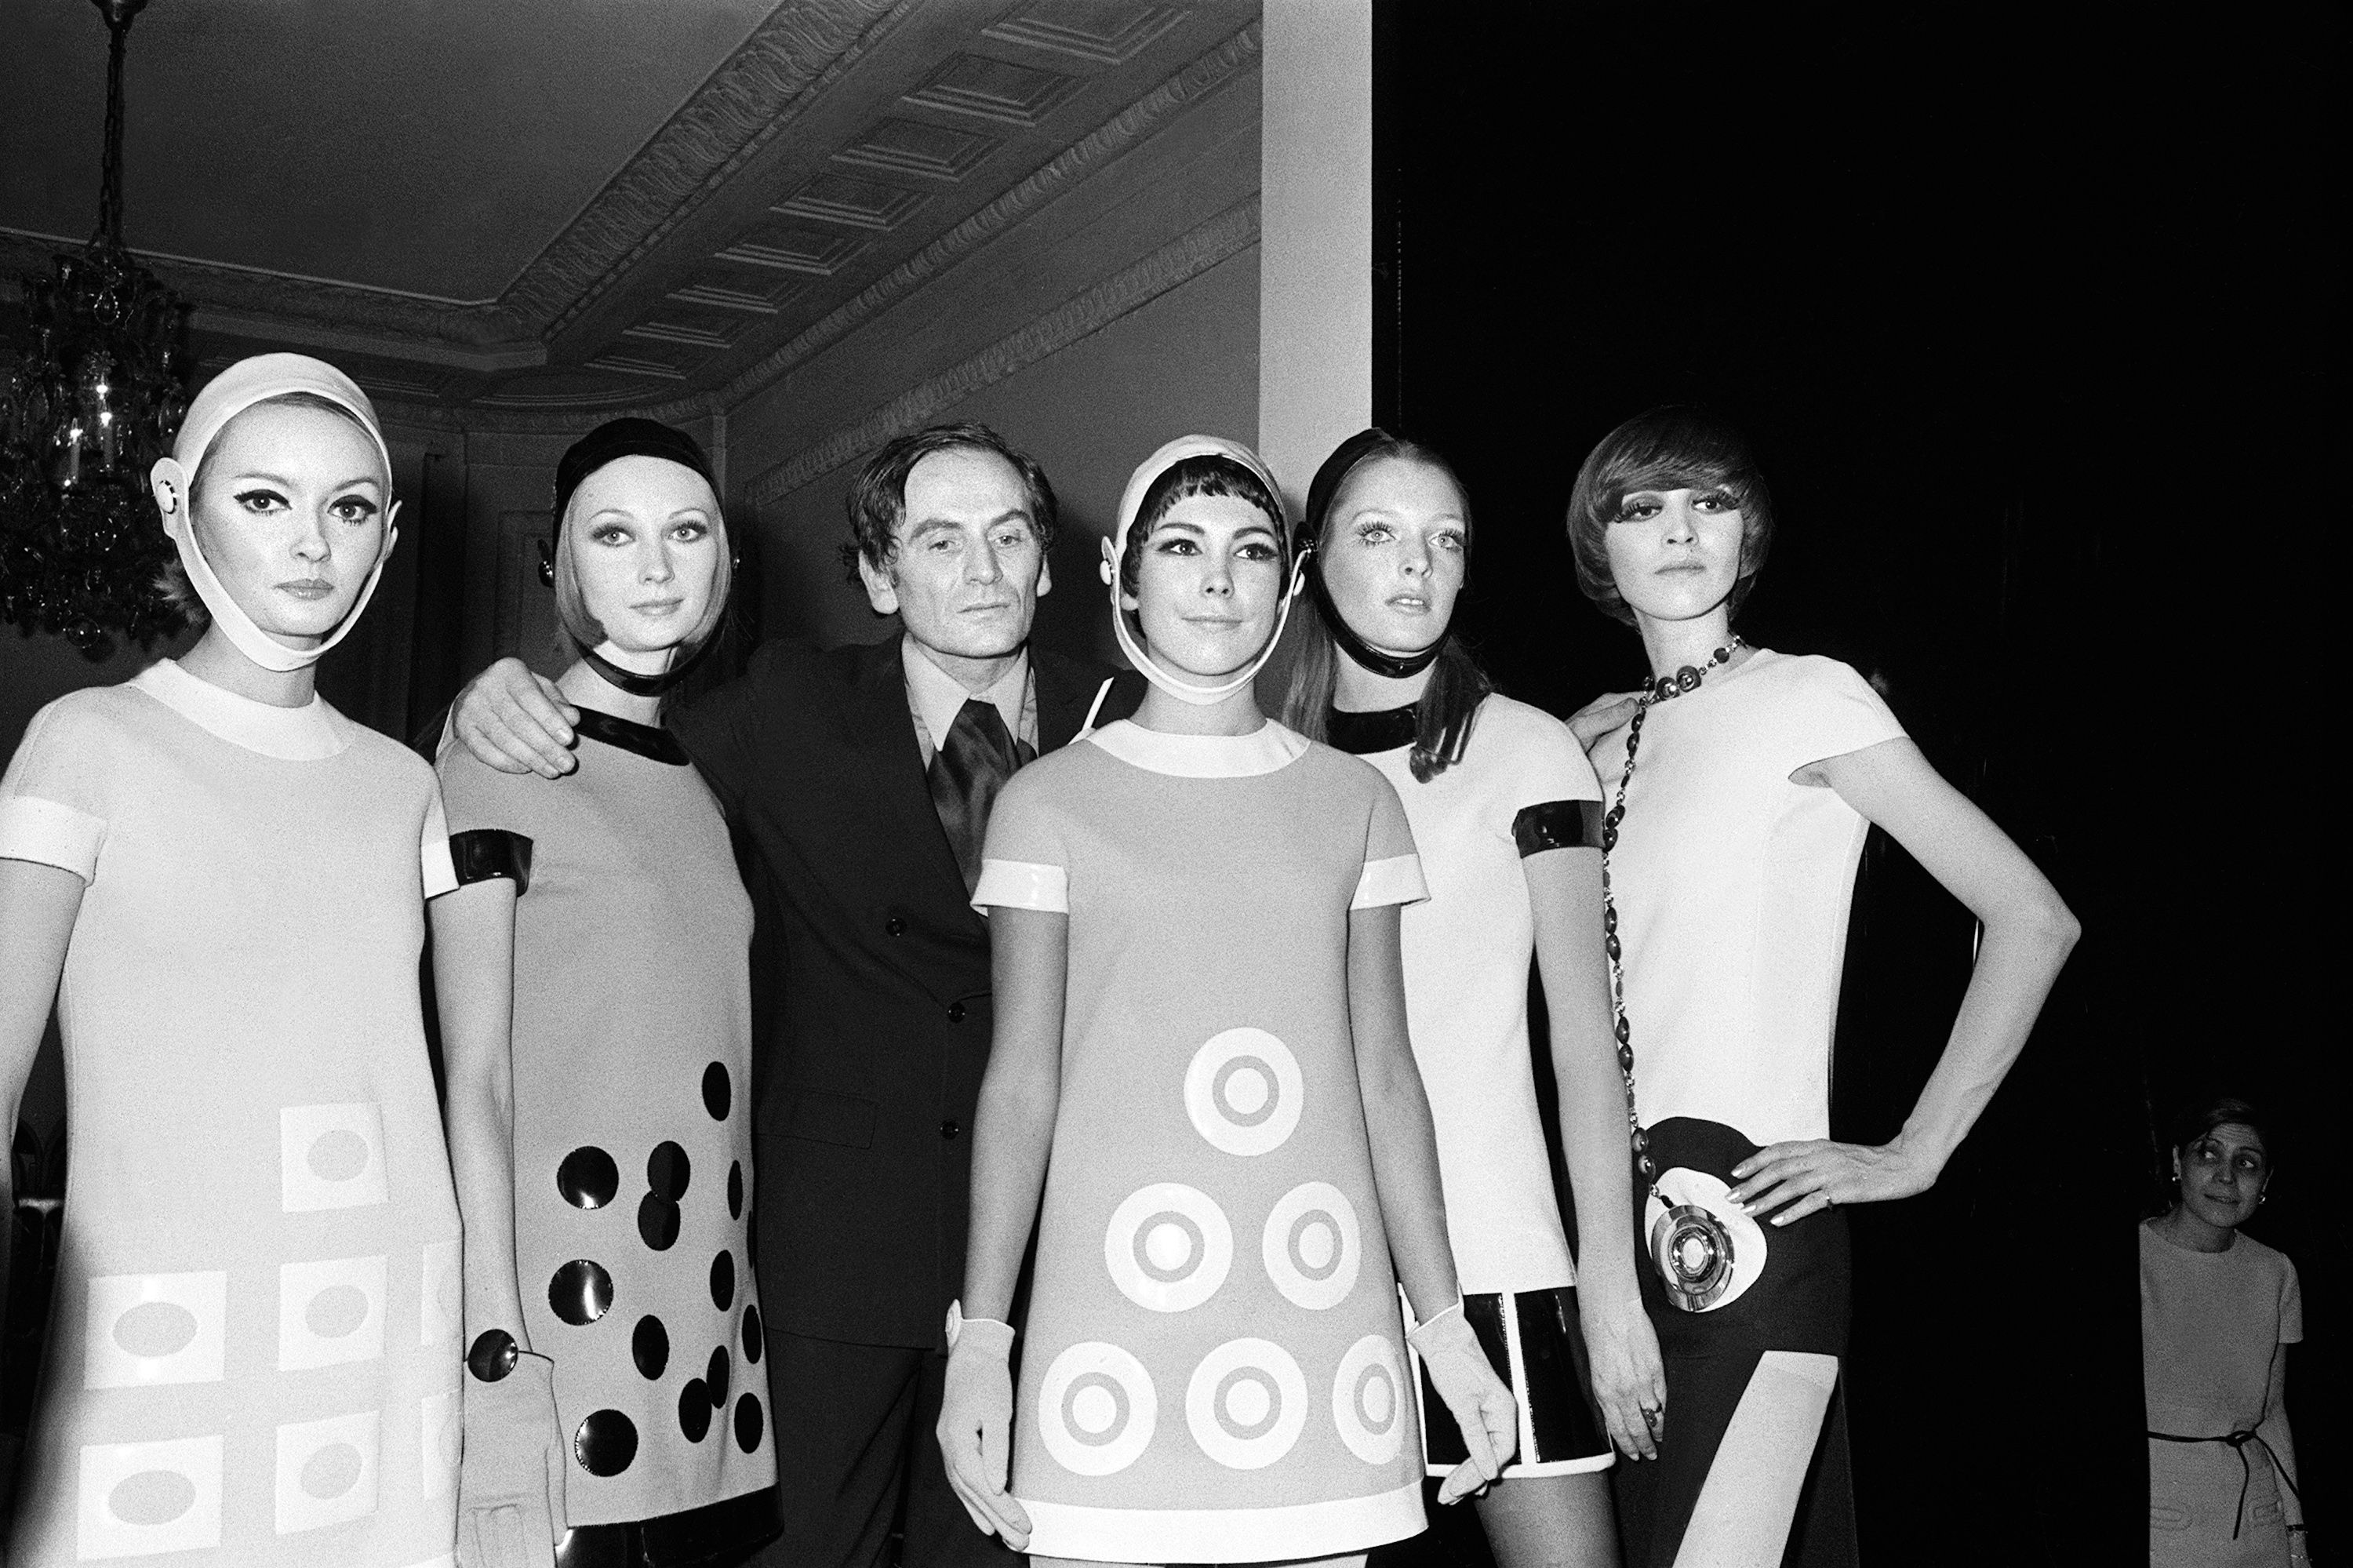 Pierre Cardin Obituary: French Fashion Designer Dies at 98 - Bloomberg